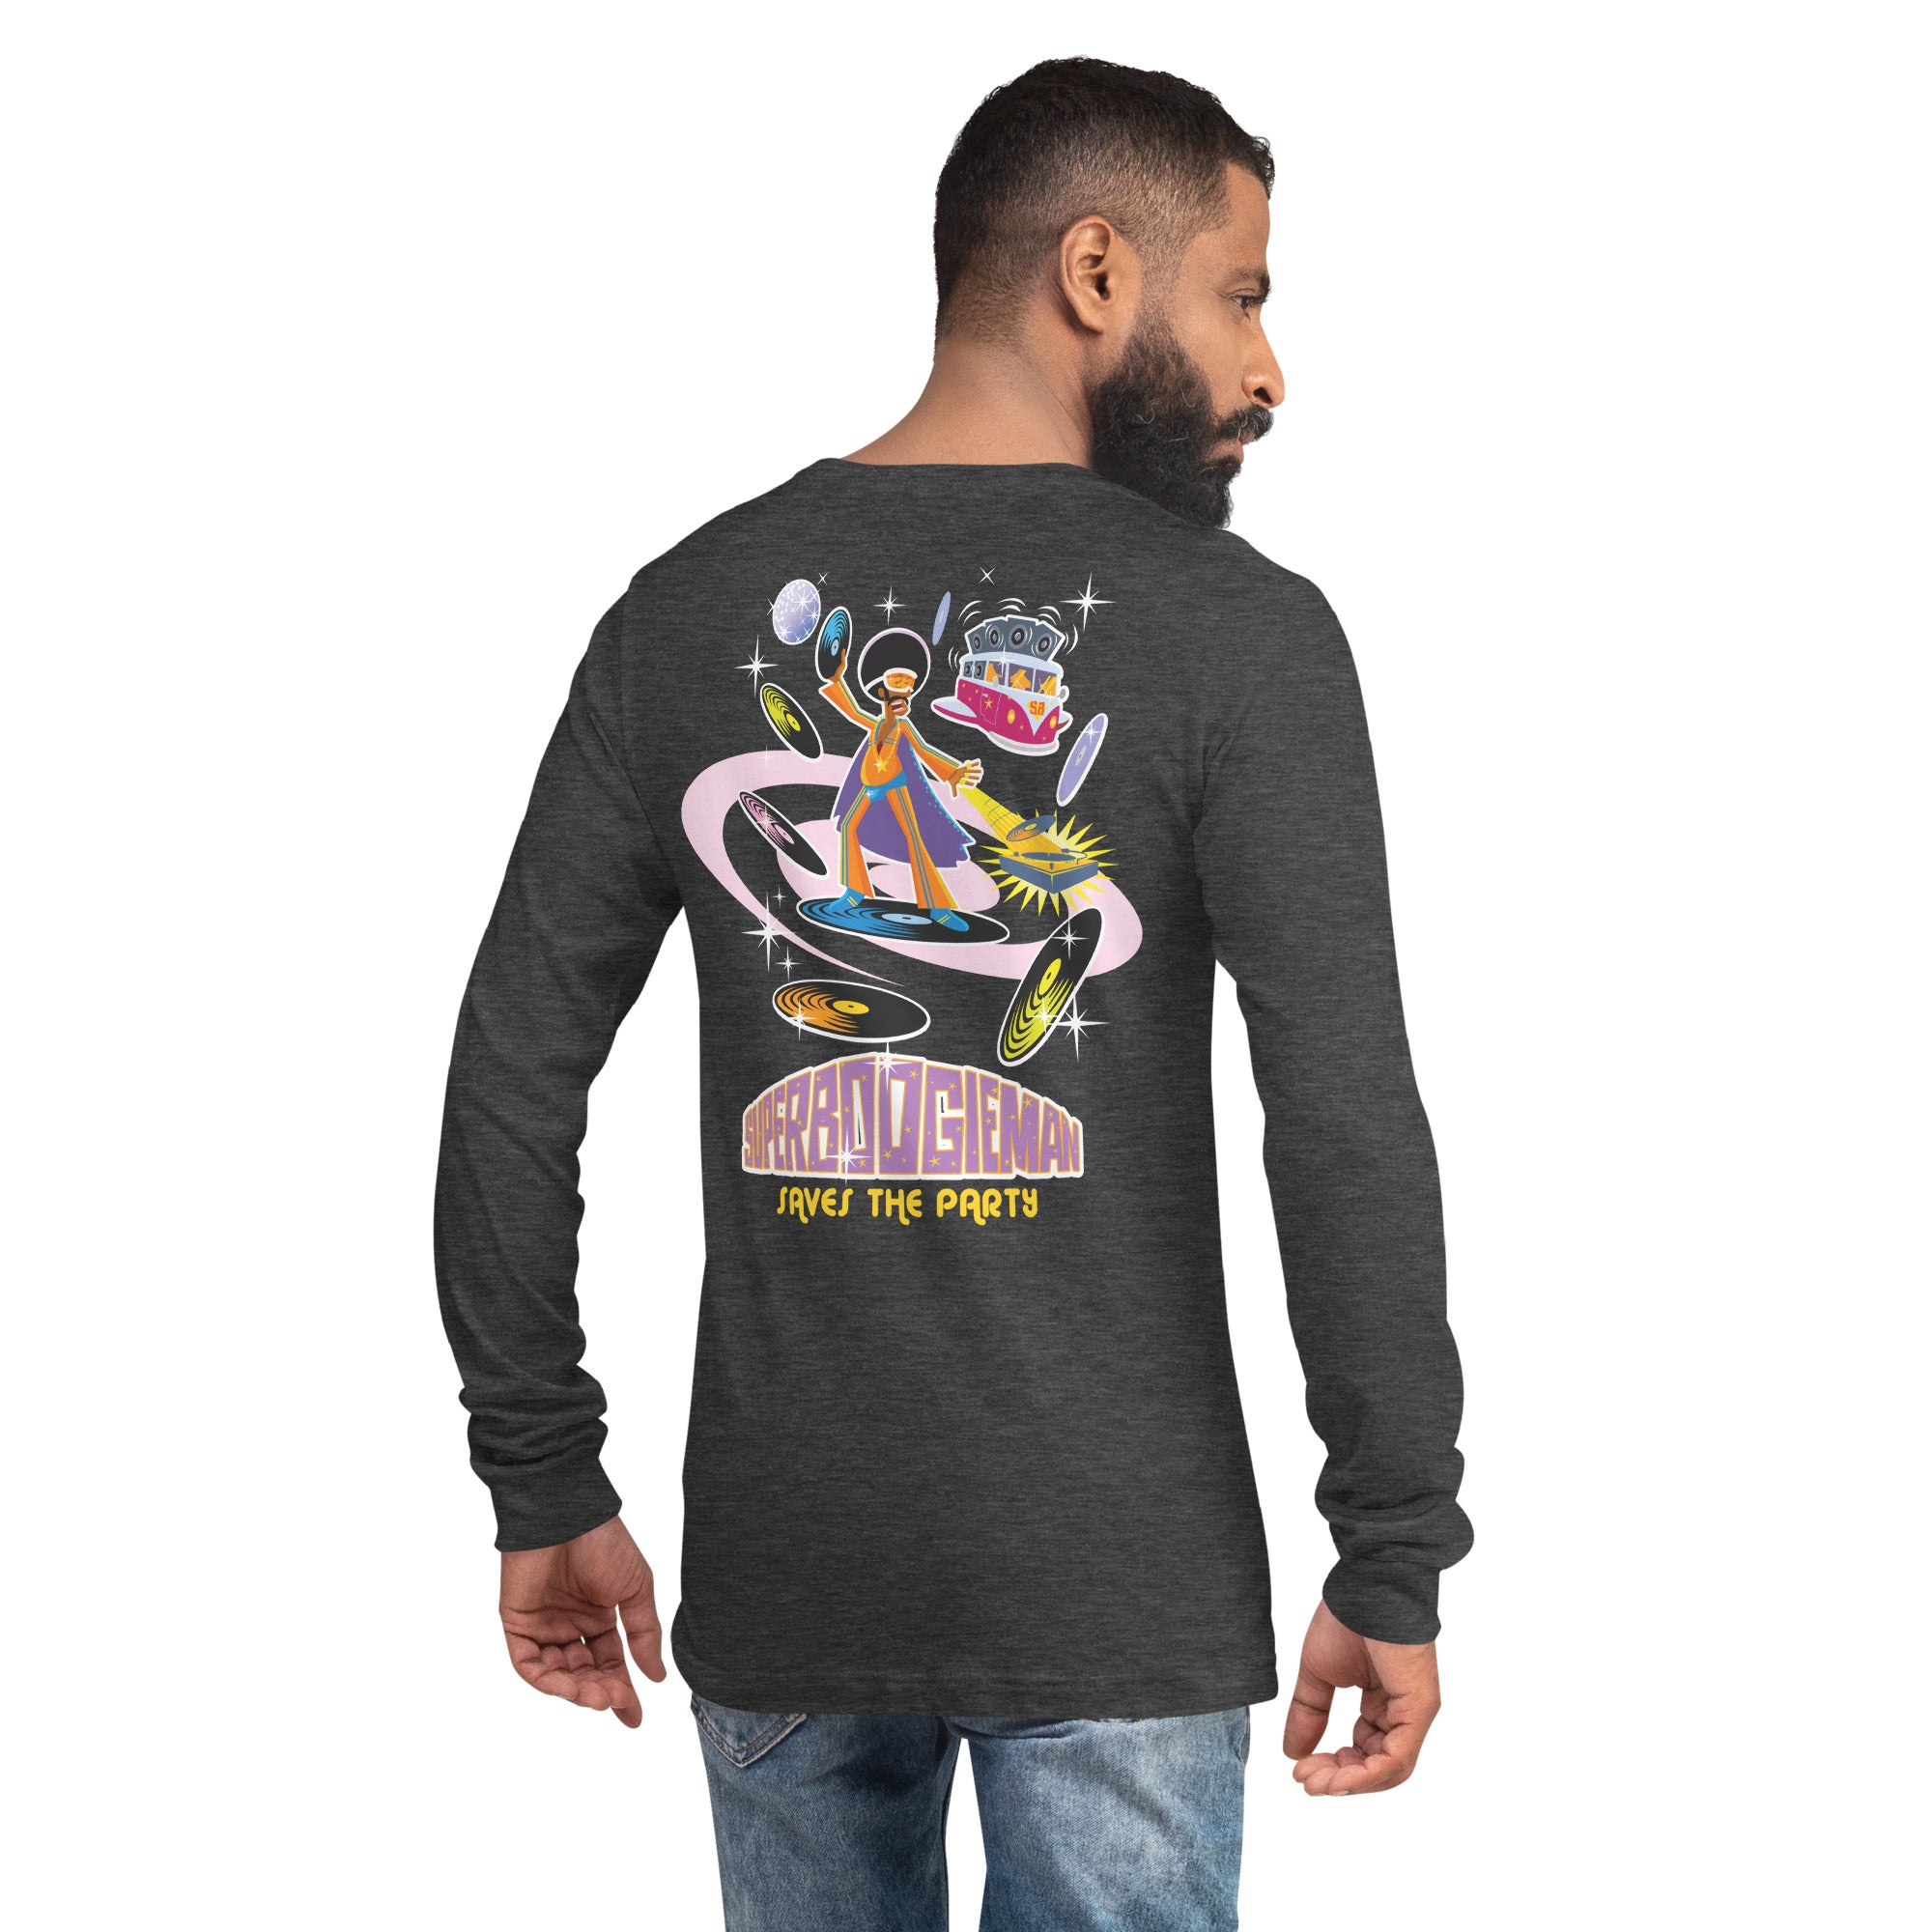 Unisex Long Sleeve Tee Superboogieman Saves the Party (front & back) on heather colors